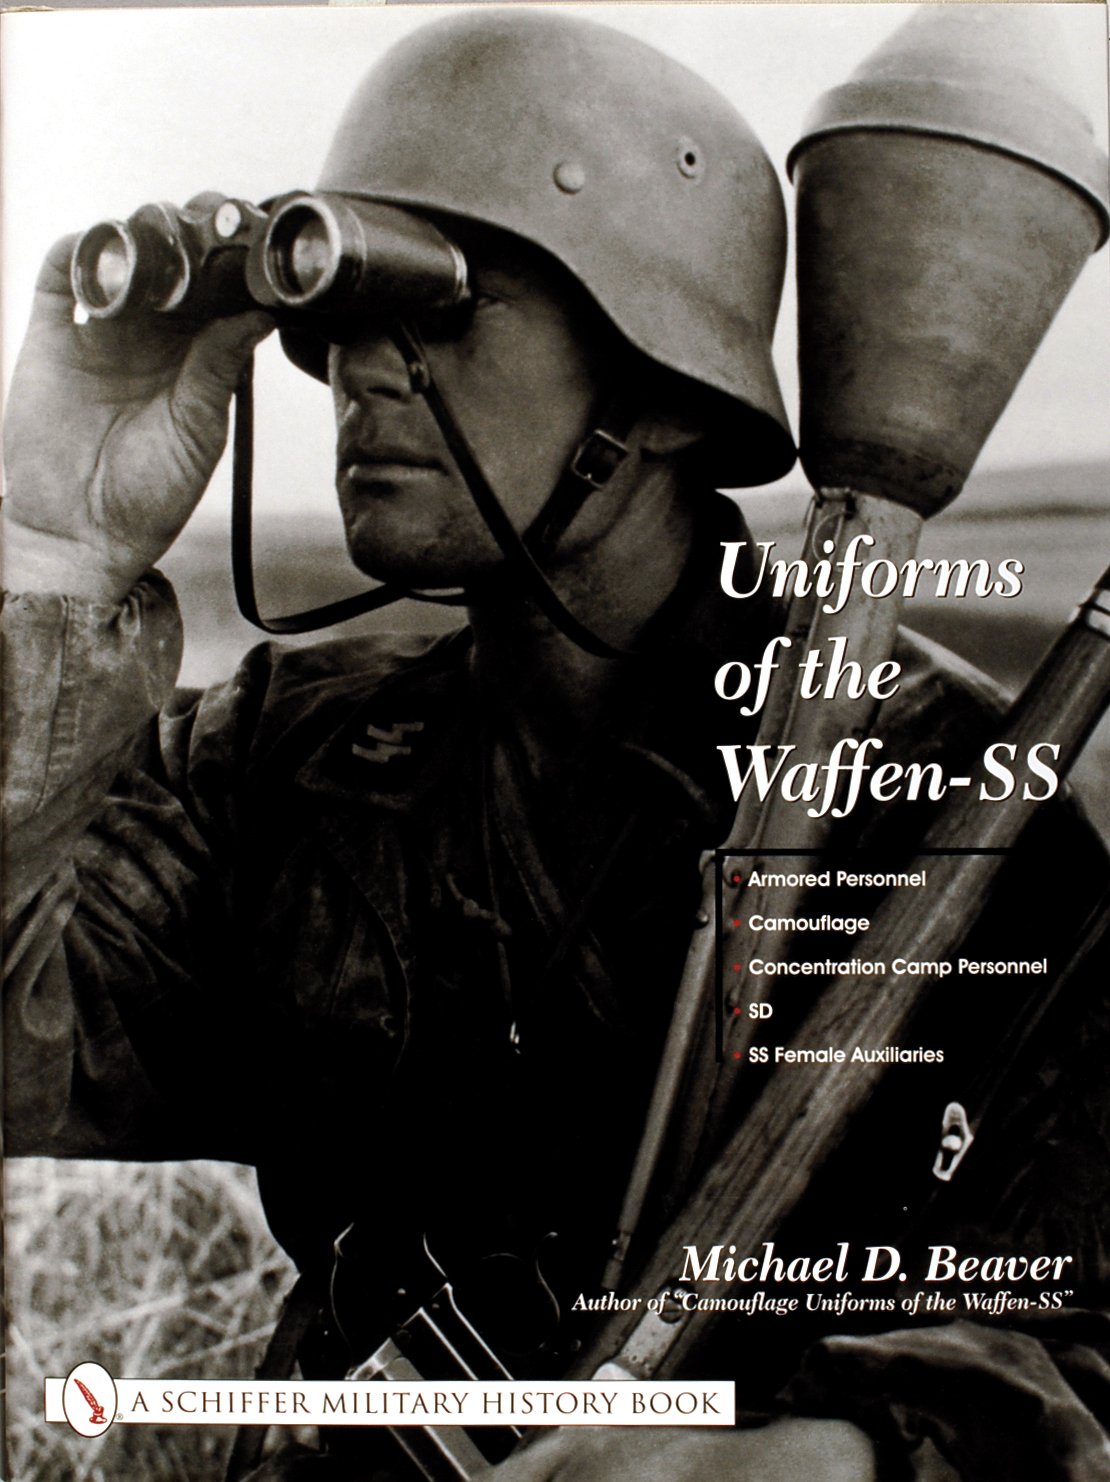 Uniforms of the Waffen-SS Vol. 3